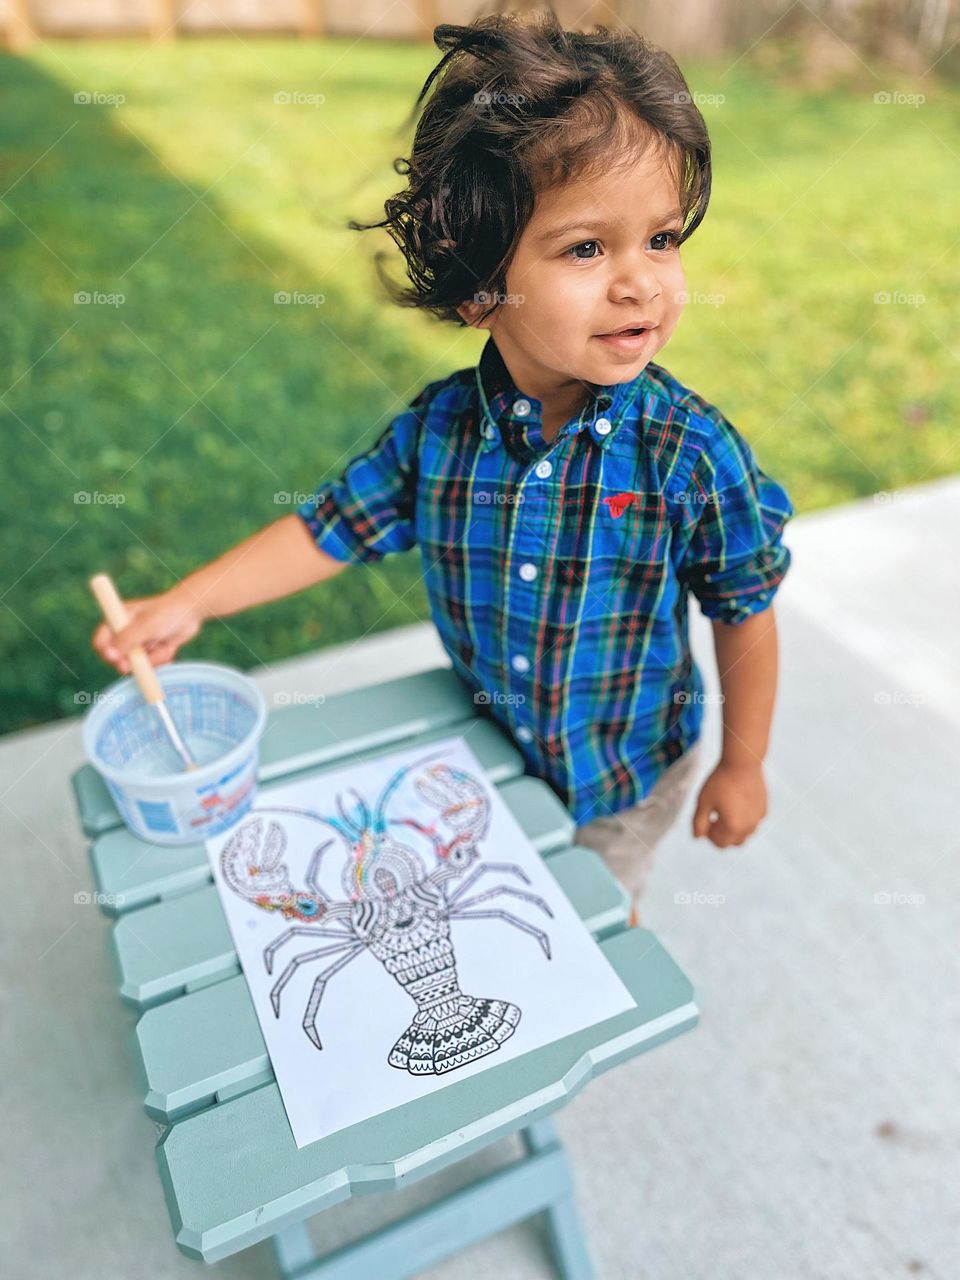 Toddler painting outside, toddler painting a lobster, arts and crafts with a toddler, creative projects with toddlers